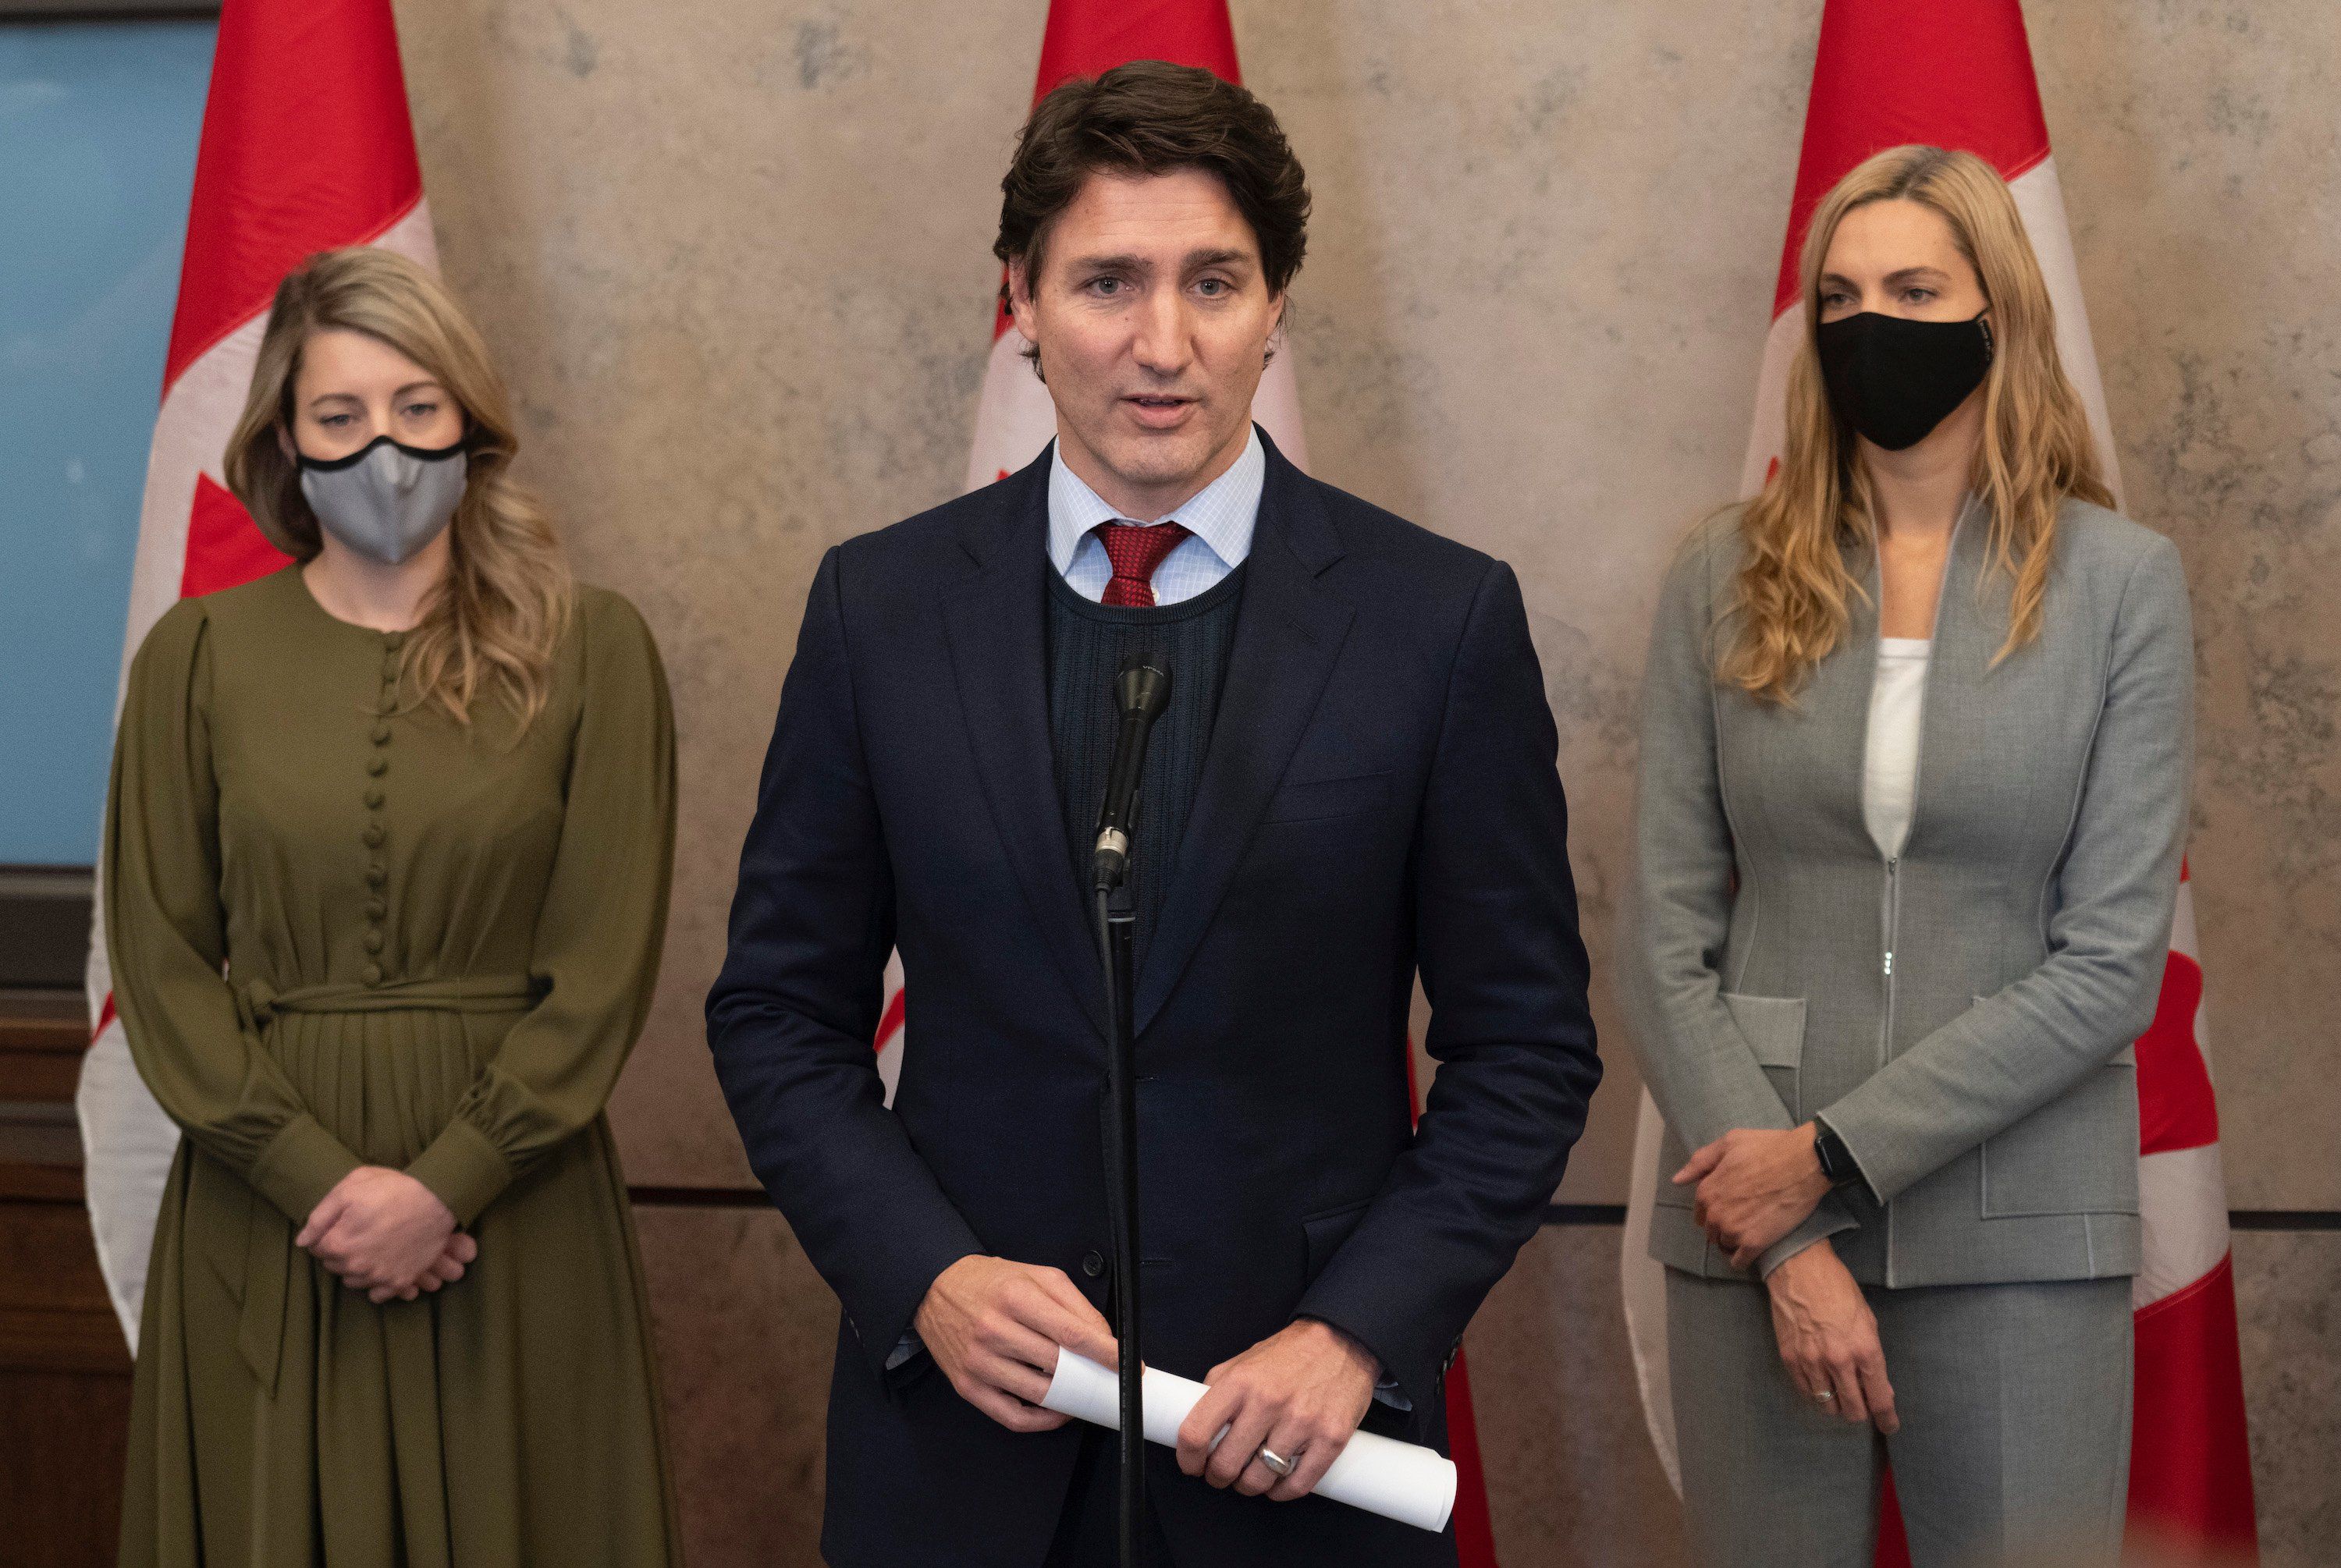 Foreign Affairs Minister Melanie Joly (left) and Sport Minister Pascale St-Onge look on as Canadian Prime Minister Justin Trudeau announces Canada will join a diplomatic boycott of the Winter Games in China following caucus, Wednesday, December 8, 2021 in Ottawa. THE CANADIAN PRESS/Adrian Wyld